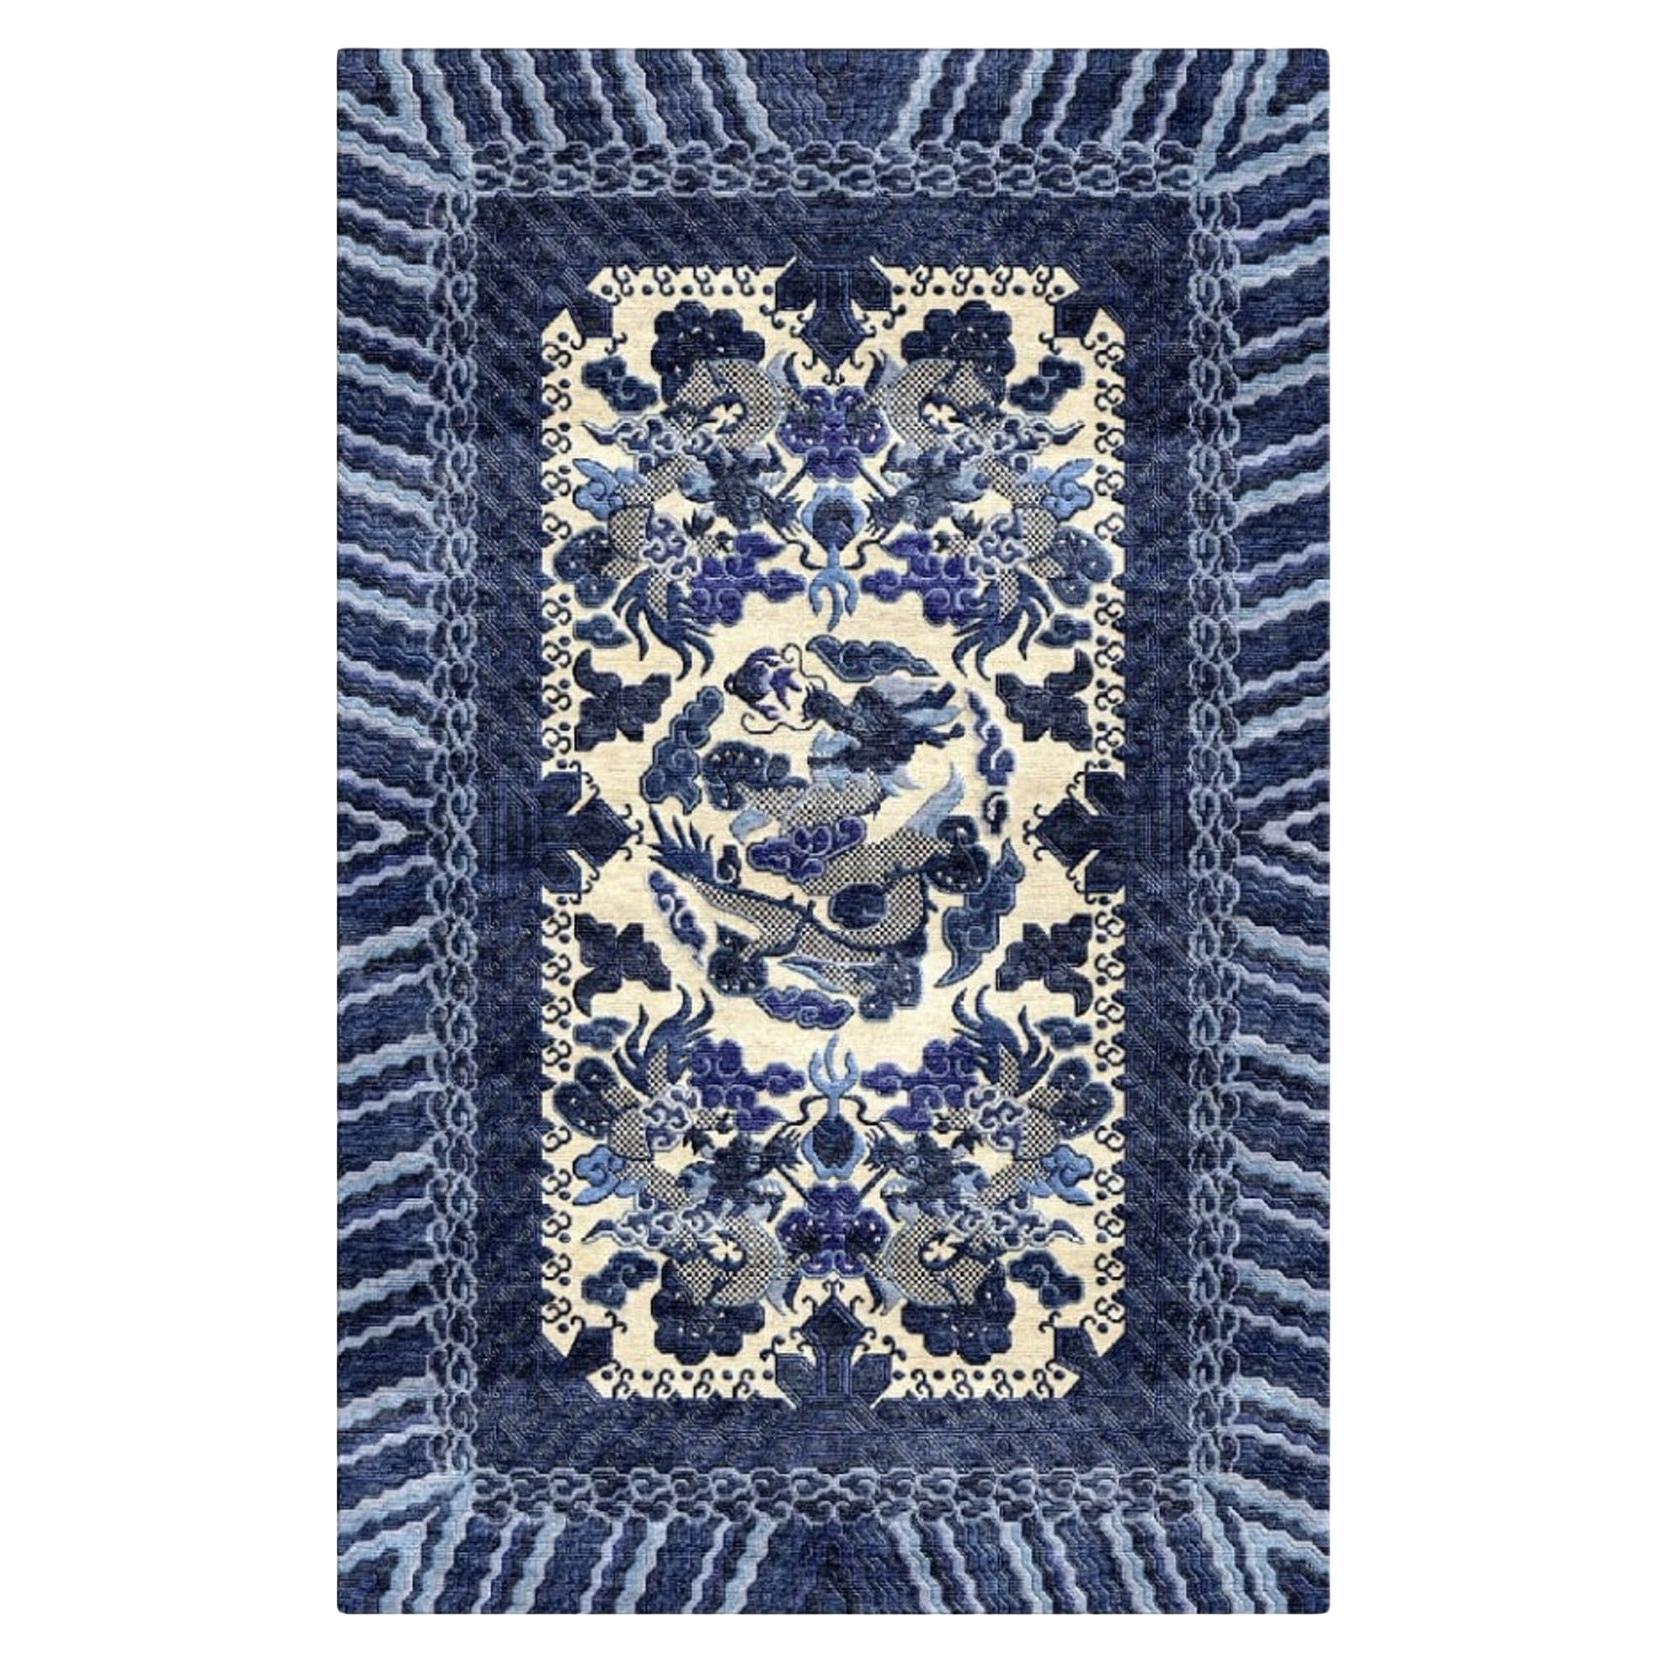 Dragon Rug Wool Silk Style Chinese Imperial Carpet Blue Beige, Djoharian Design For Sale